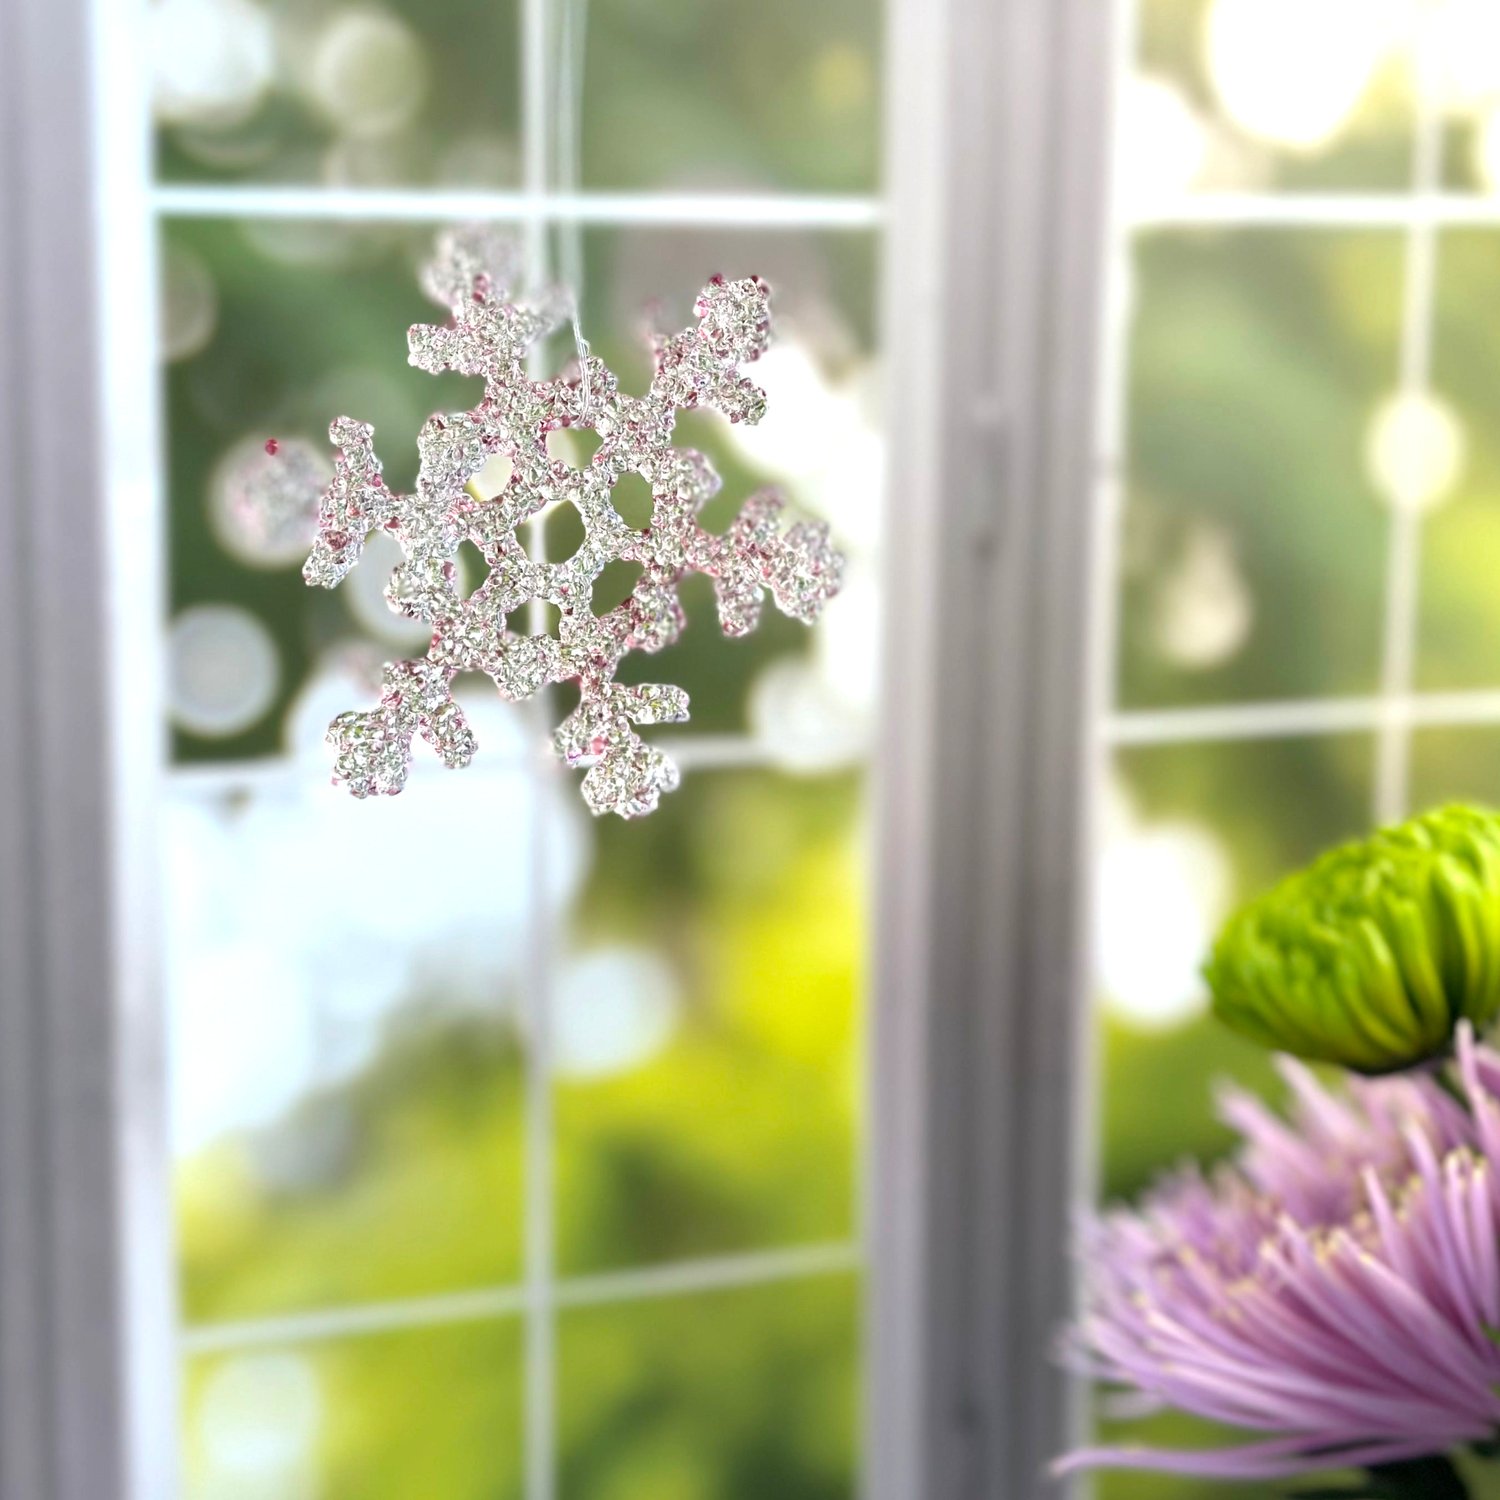 pink glass snowflake hanging in sunny window with purple and green flowers